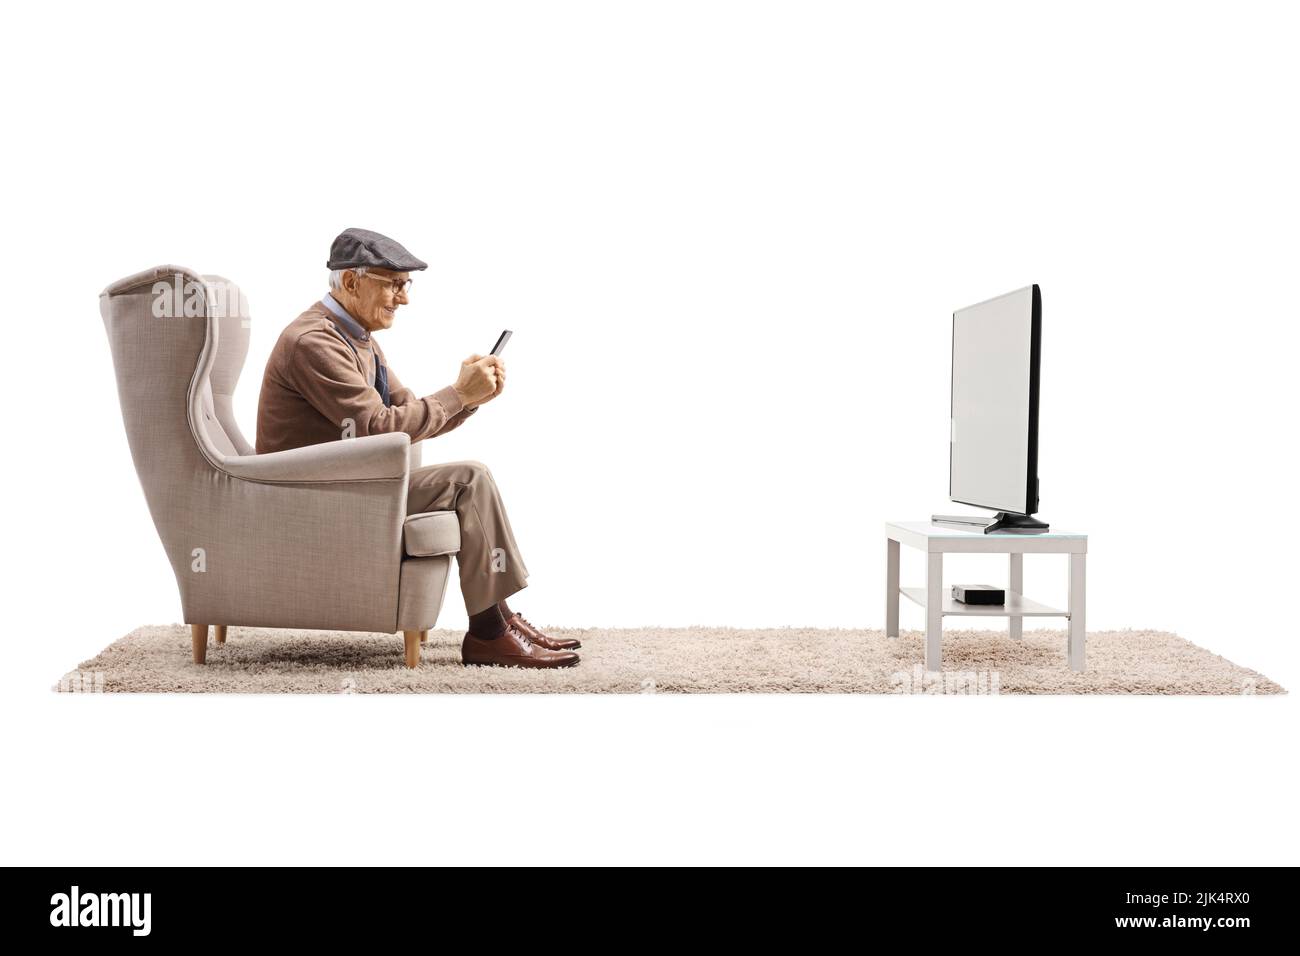 Elderly man in an armchair sitting in front of a TV and using a smartphone isolated on white background Stock Photo